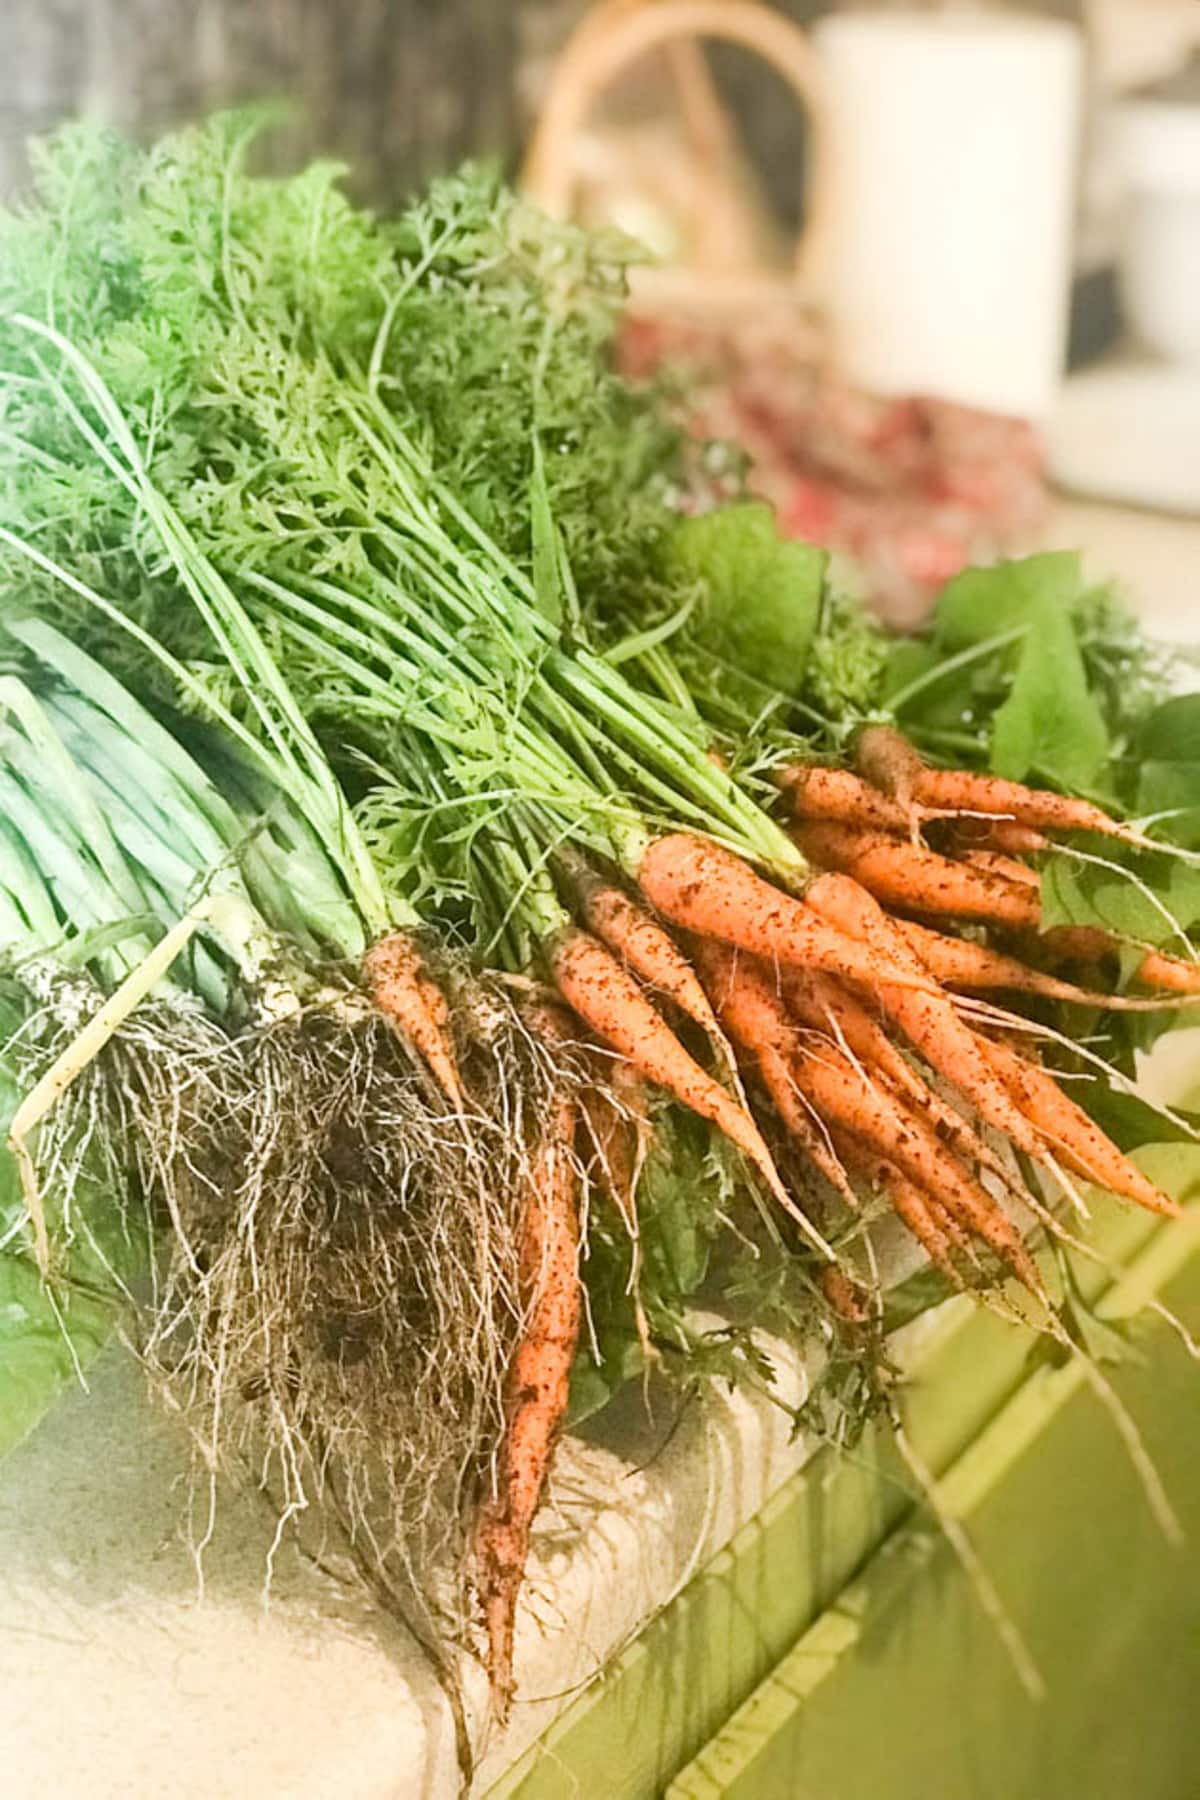 carrots harvested from the garden